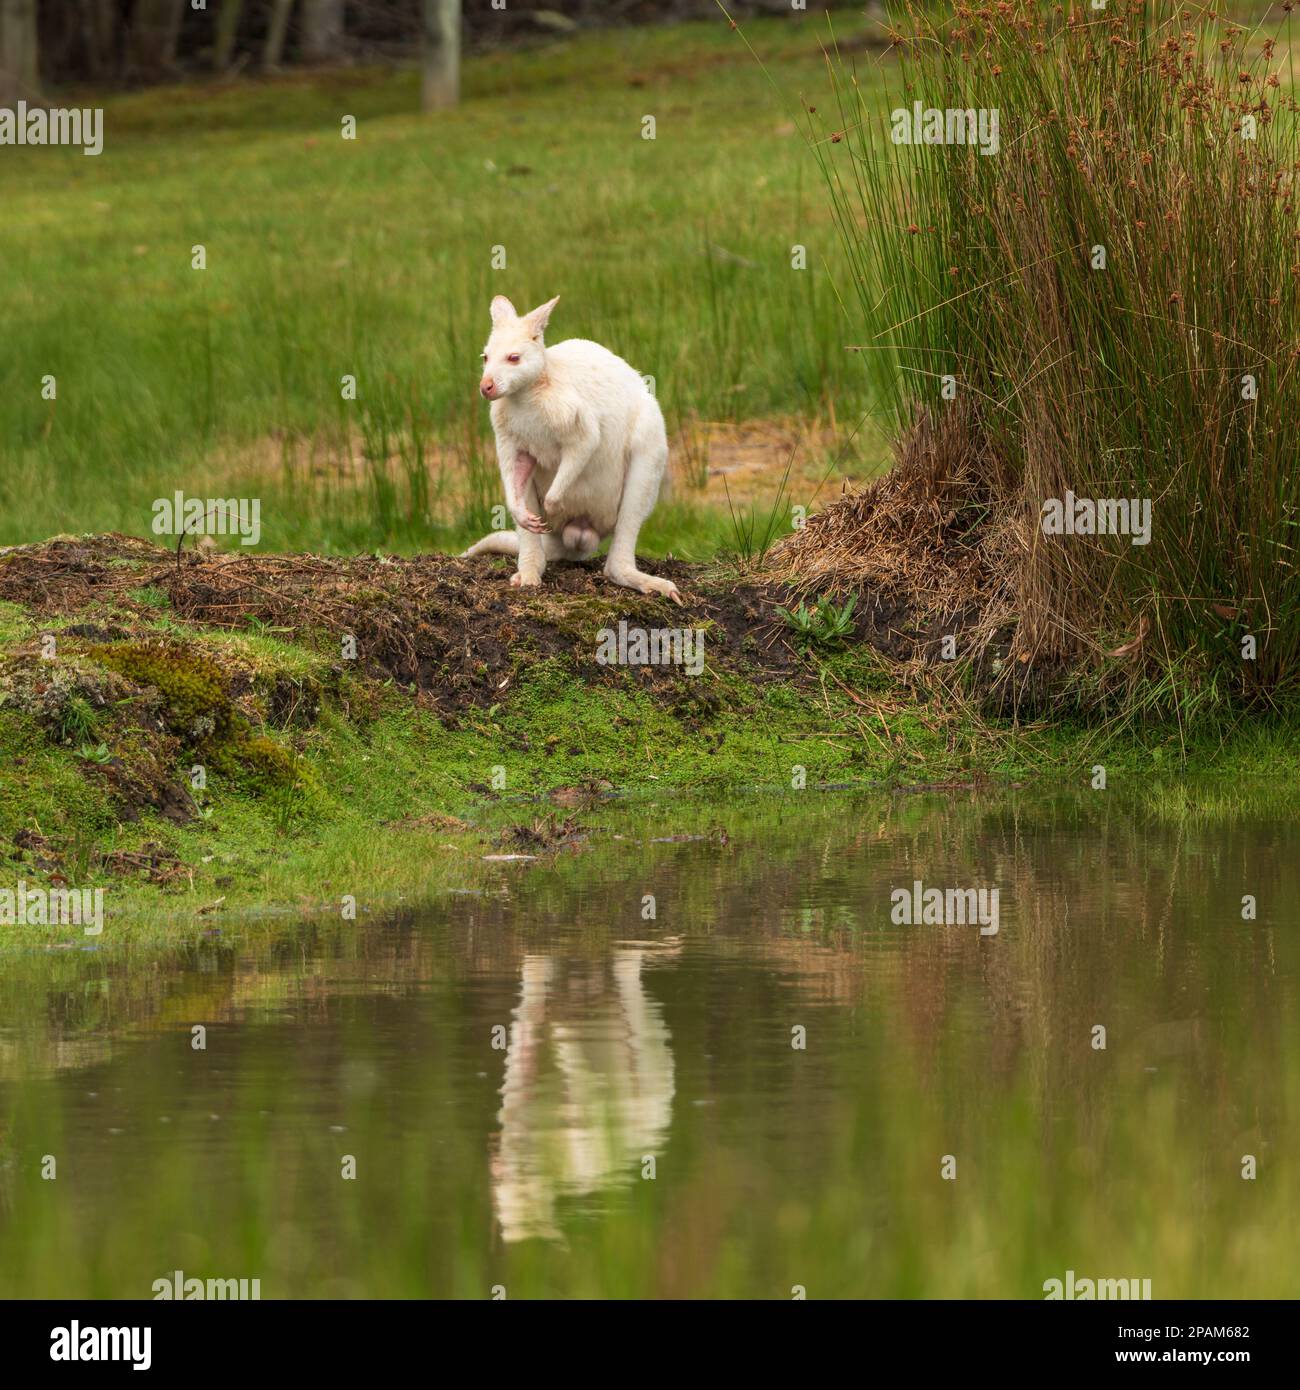 Albino white wallaby with a reflection in the water at Bruny Island, Tasmania. Stock Photo